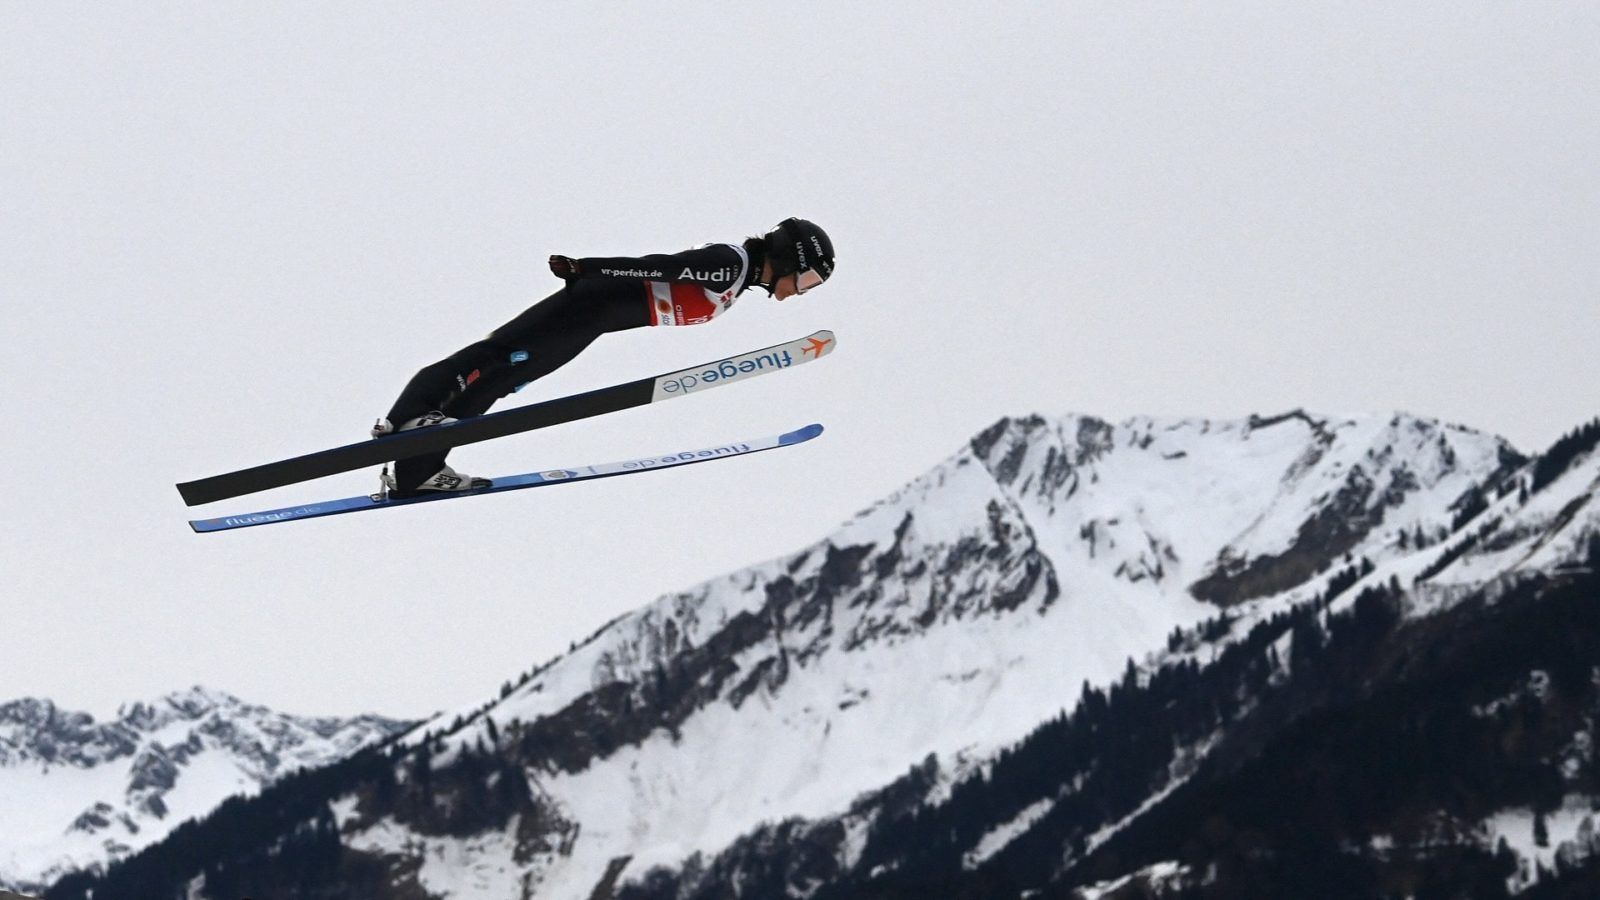 These Seven Events Will Debut at the 2022 Beijing Winter Olympics